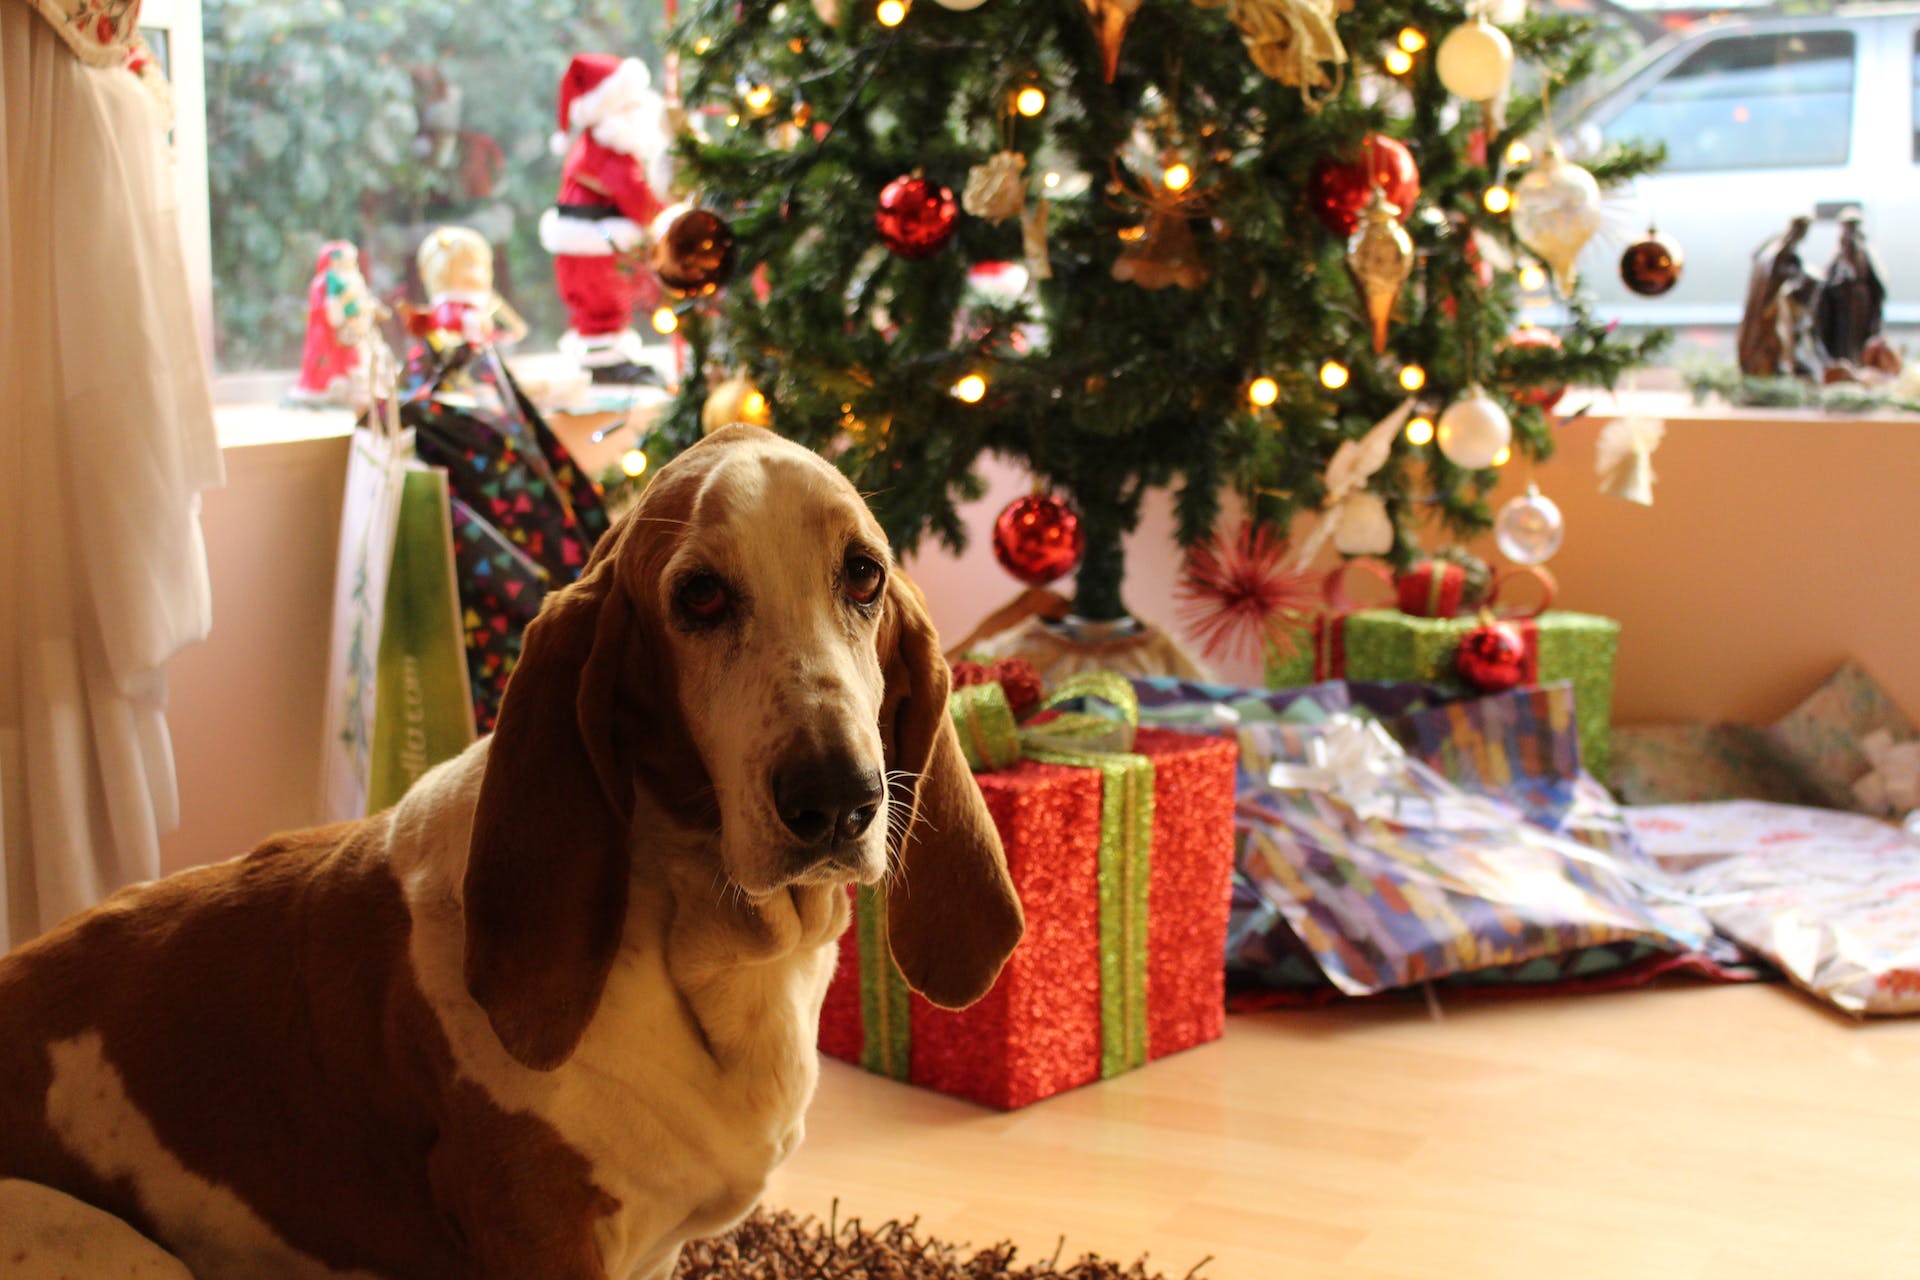 A Basset Hound sitting in front of a Christmas tree and gifts